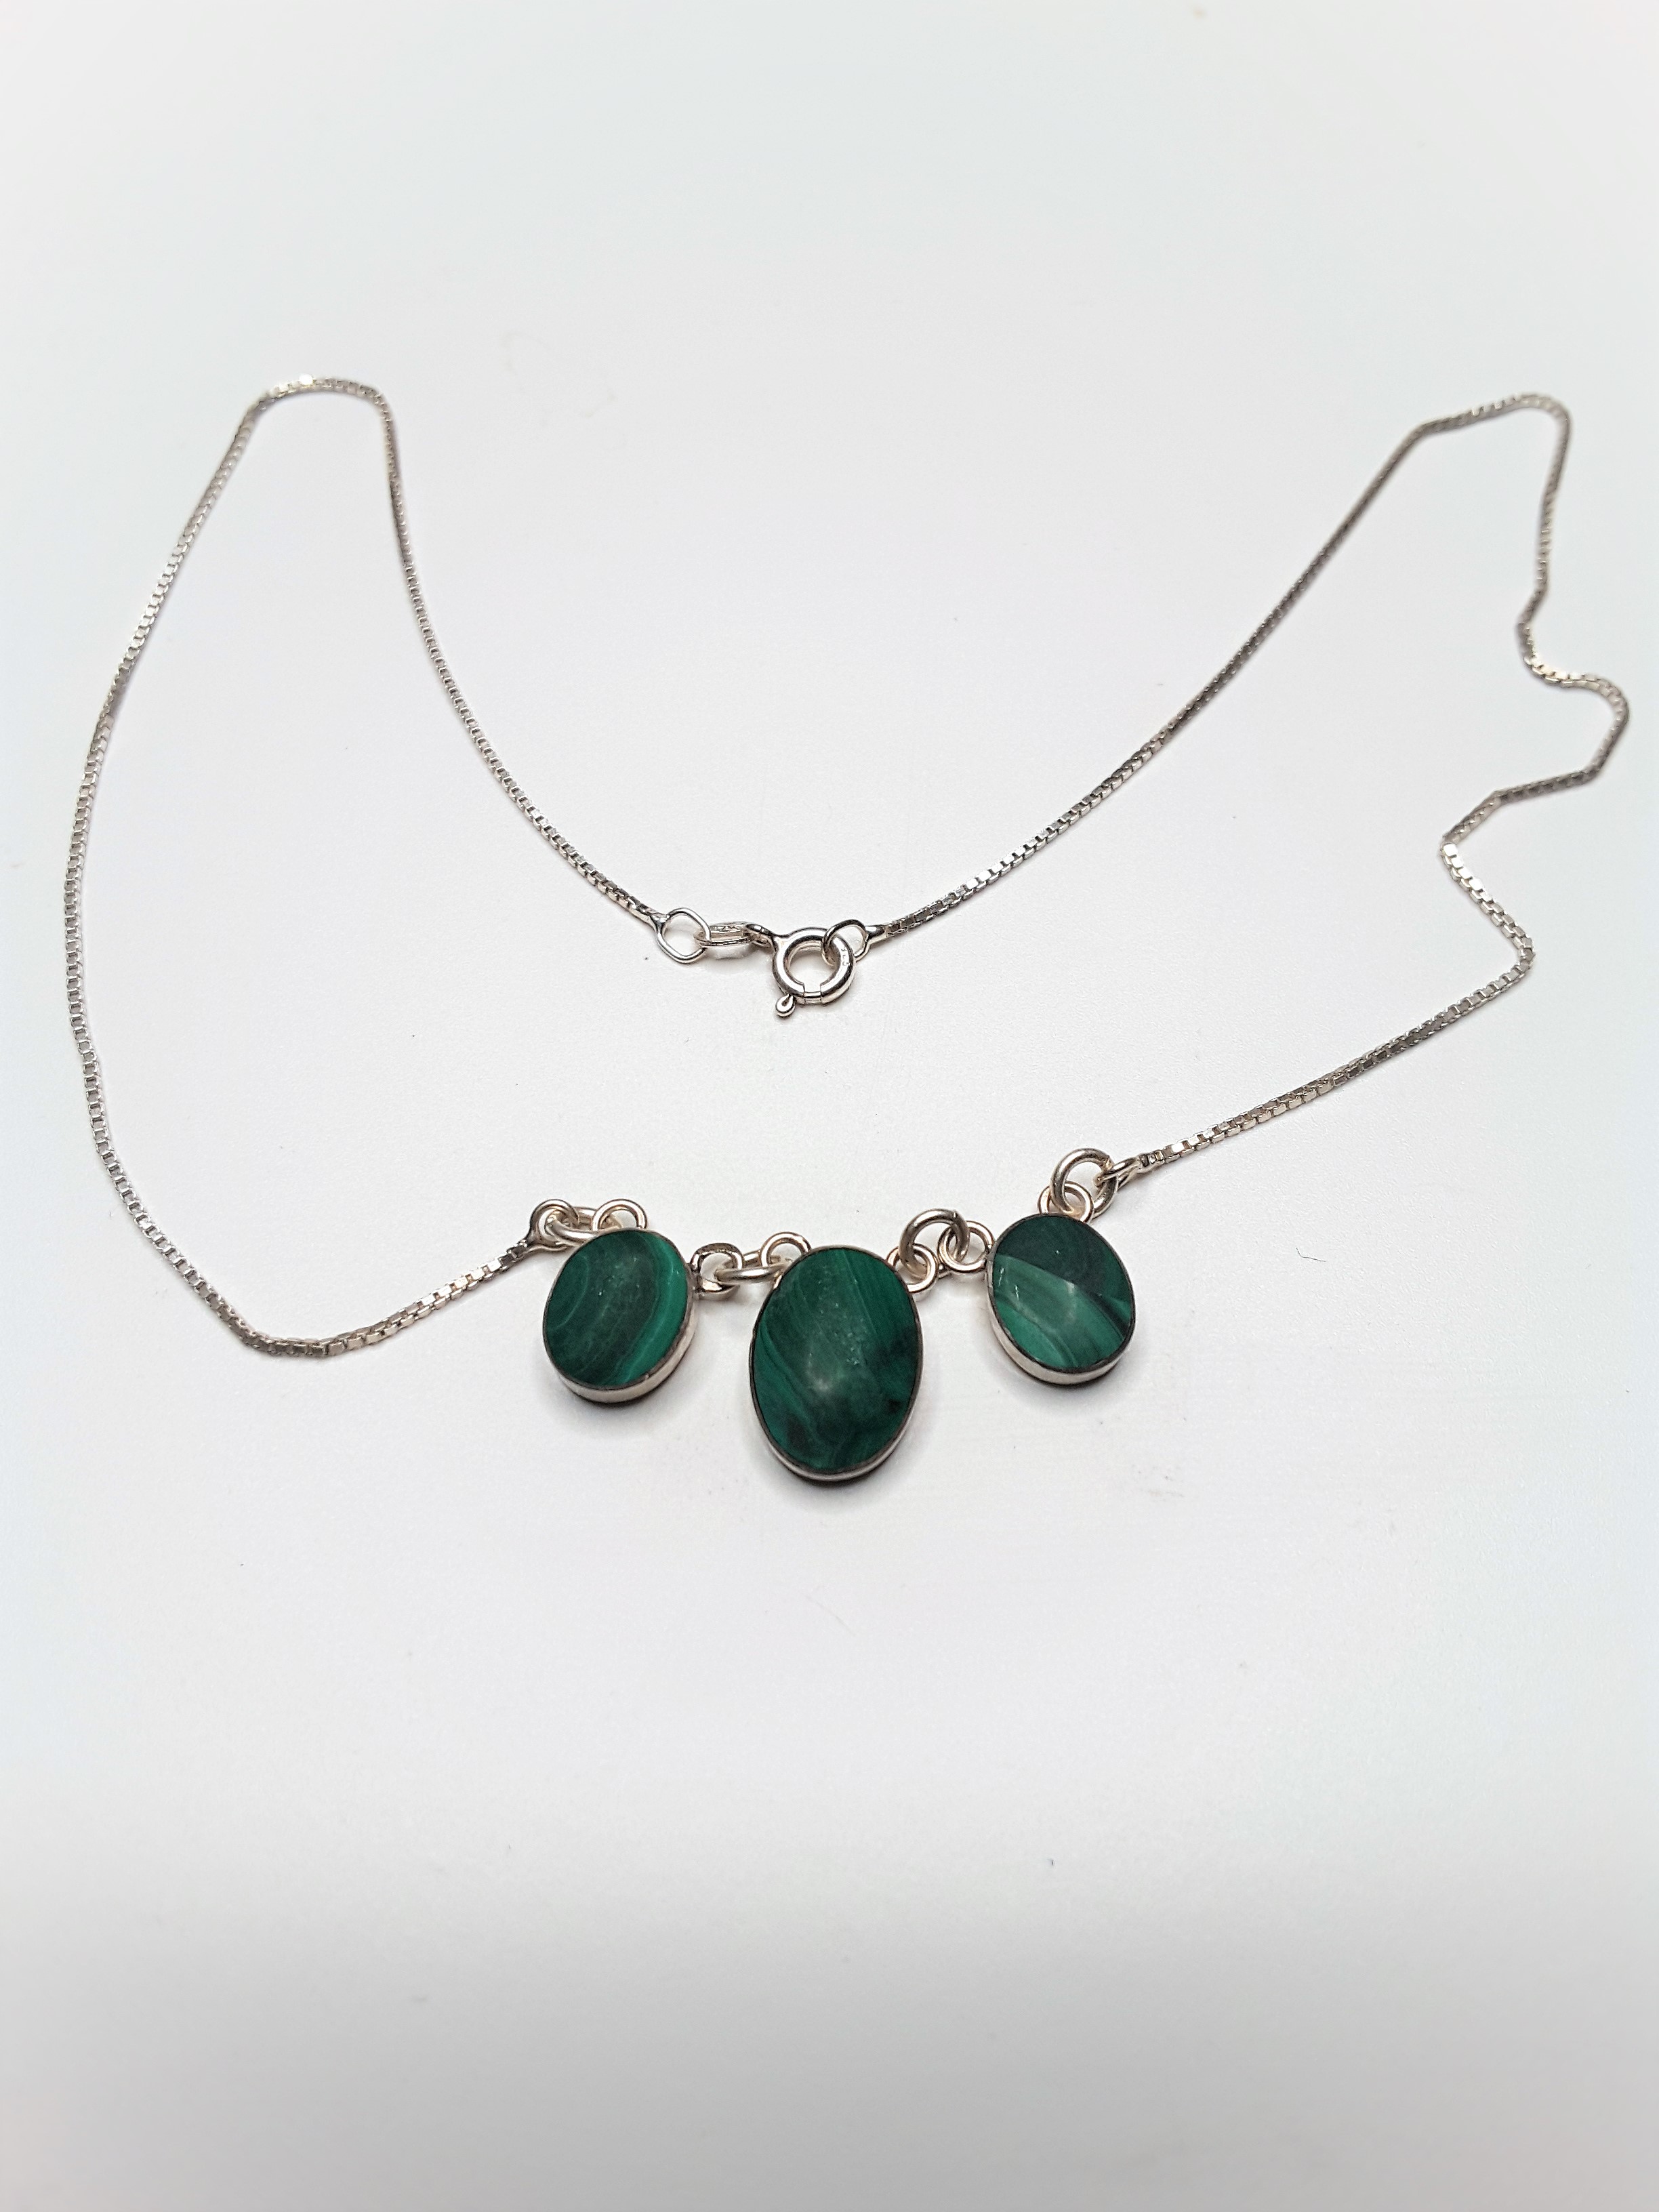 Molino Italian Silver Necklace With Green Stones - Image 2 of 4